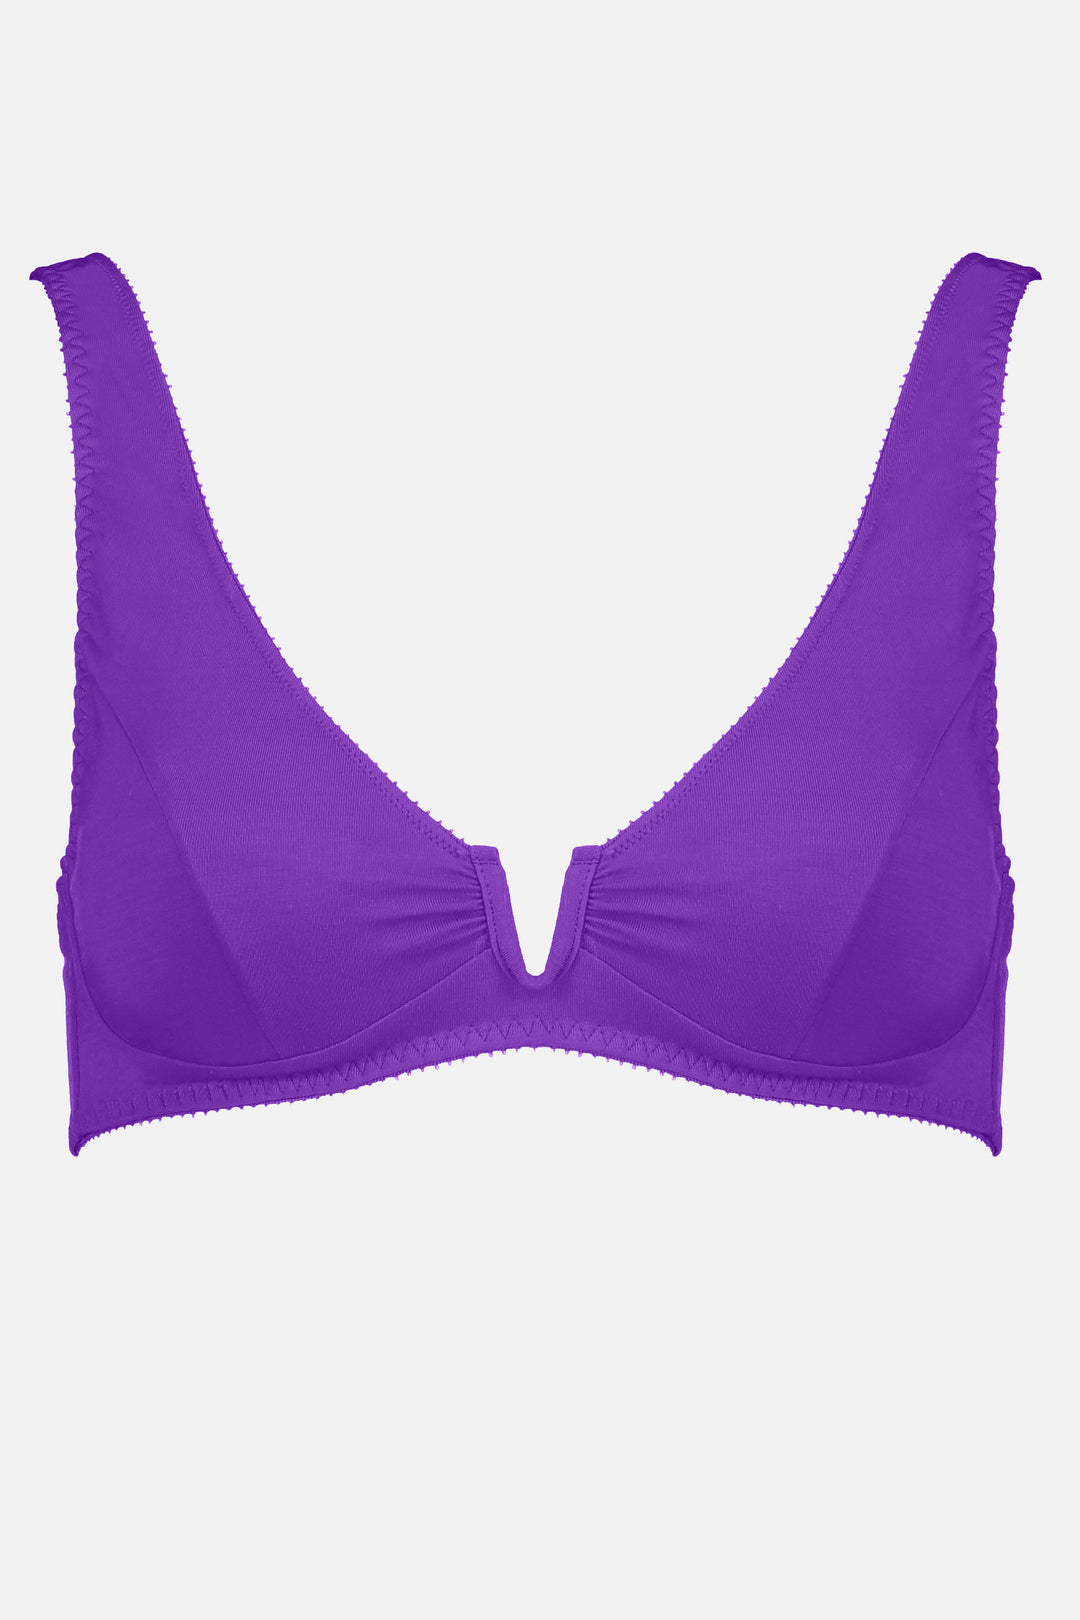 Videris Lingerie Sarah underwire free soft cup bra in purple TENCEL™ with a scooped plunge cup and front U wire